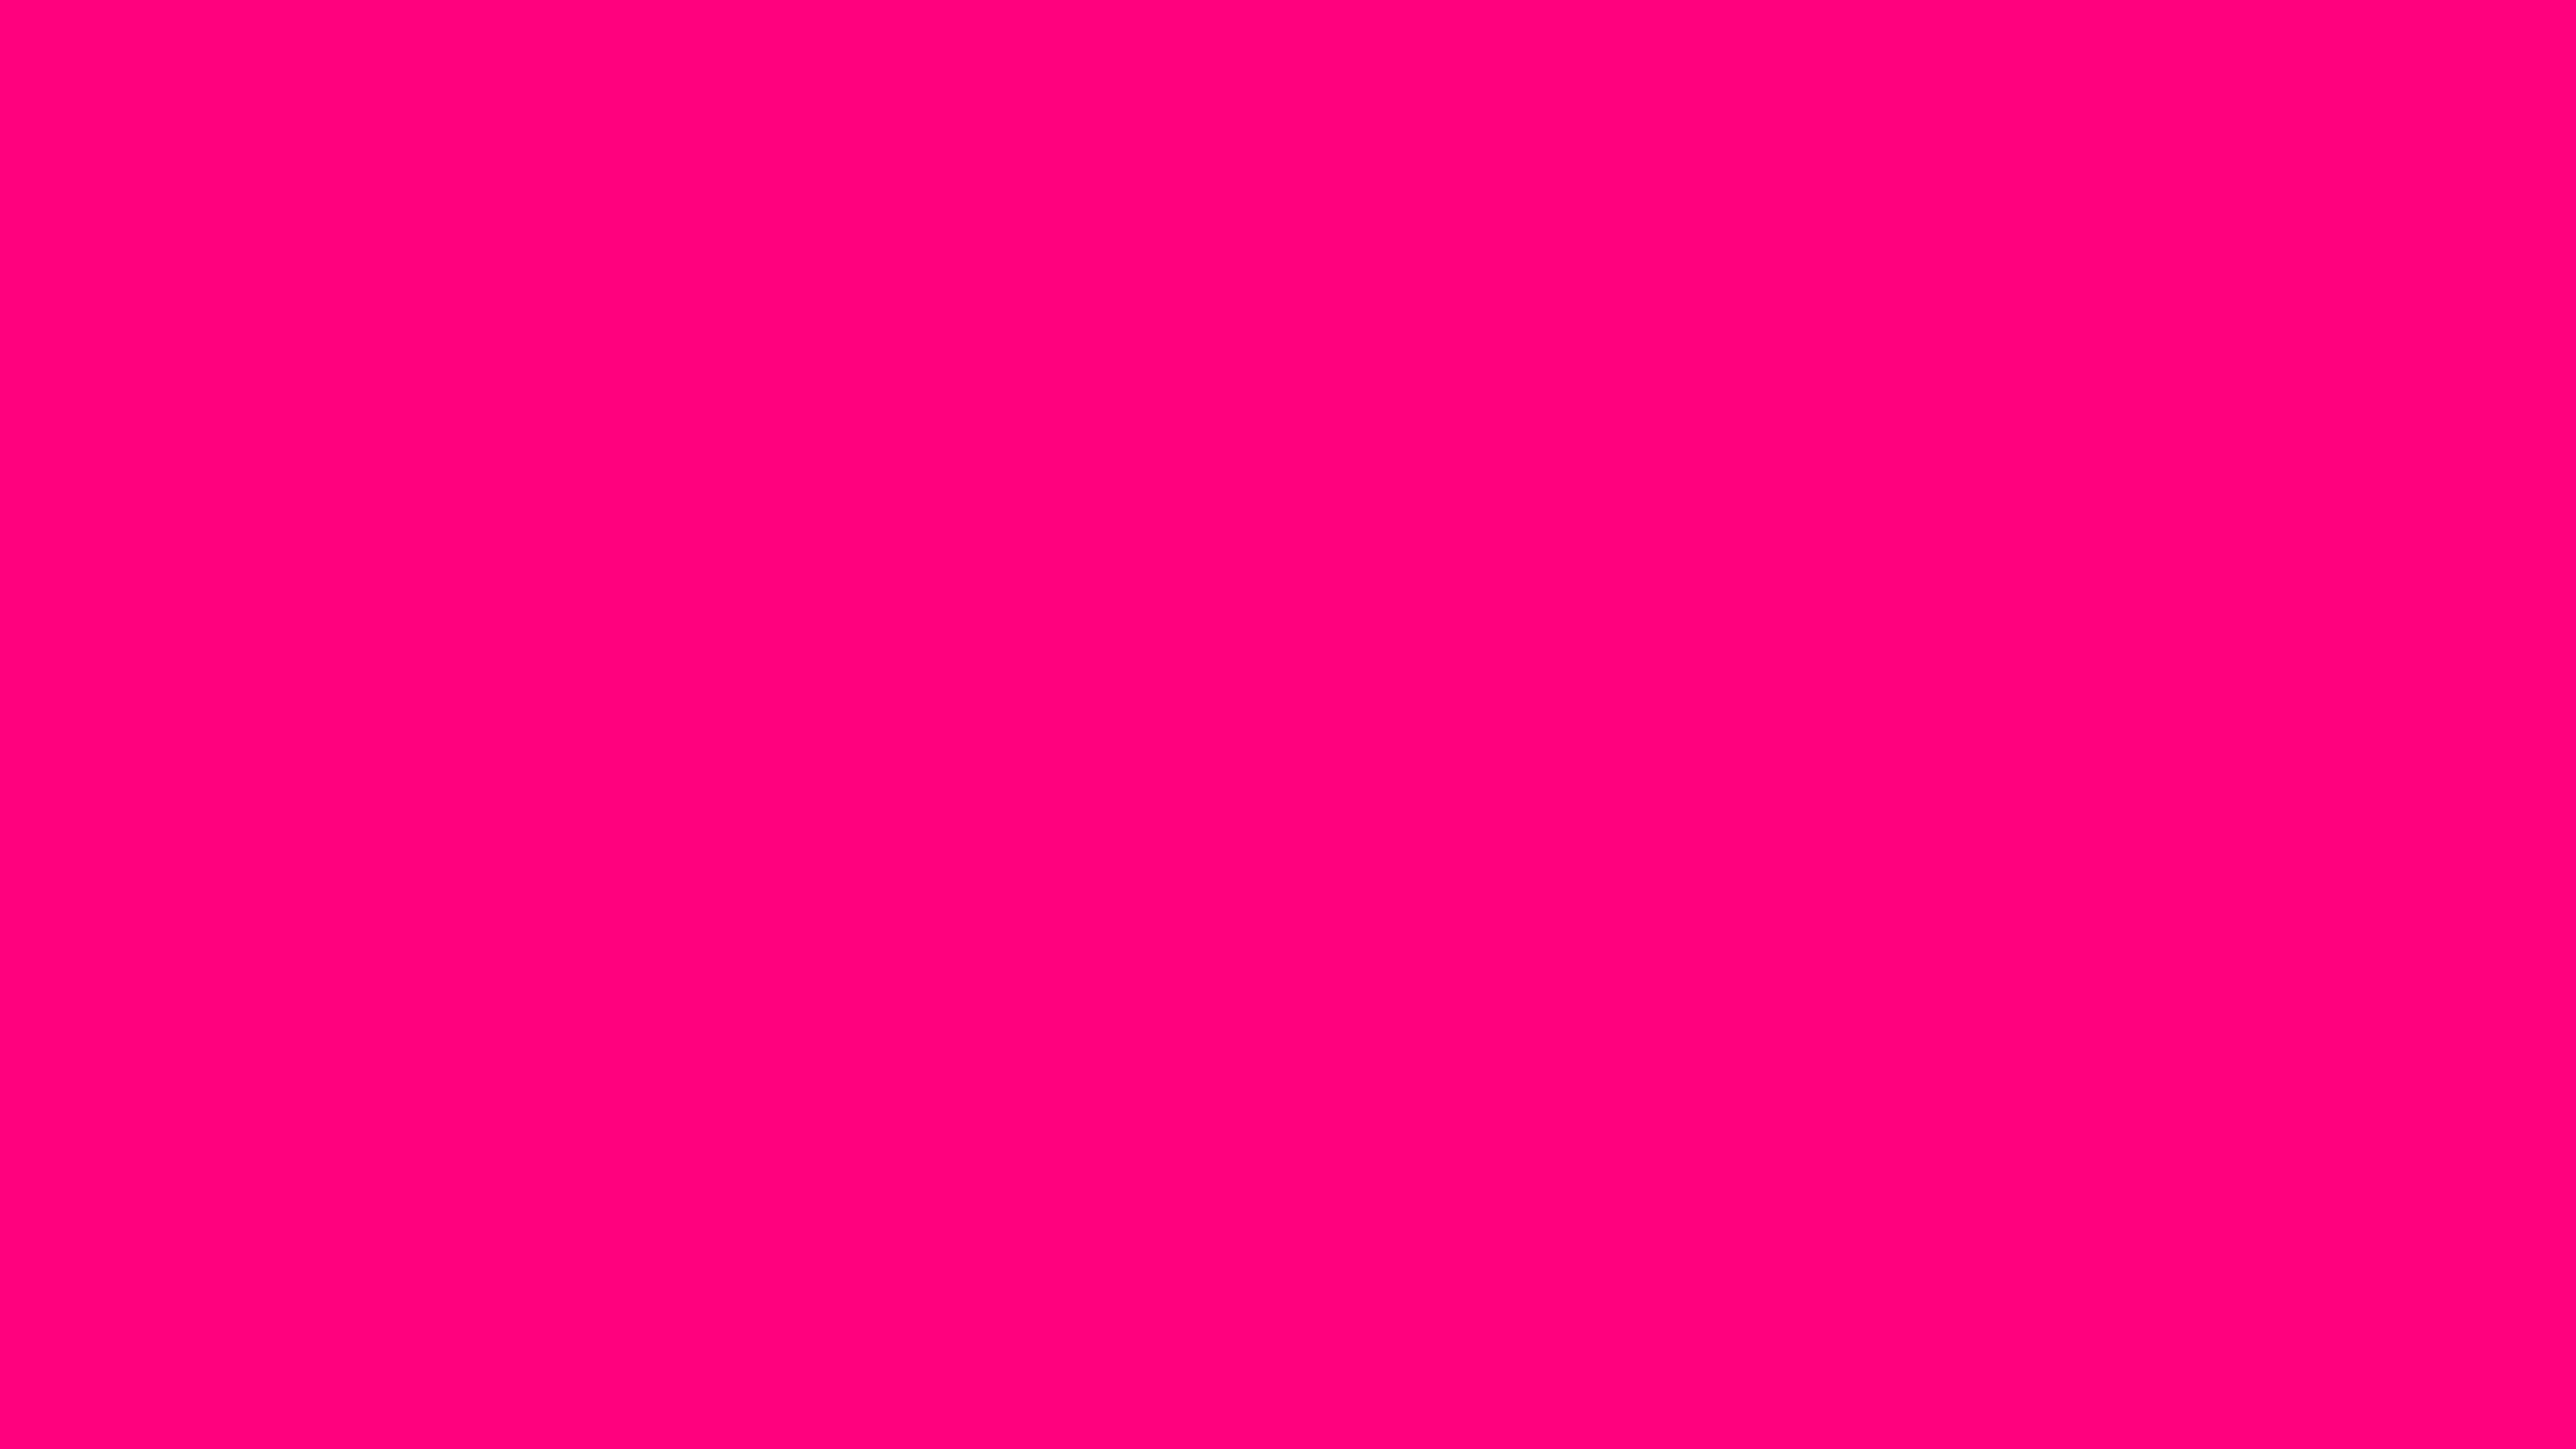 7680x4320 Bright Pink Solid Color Background